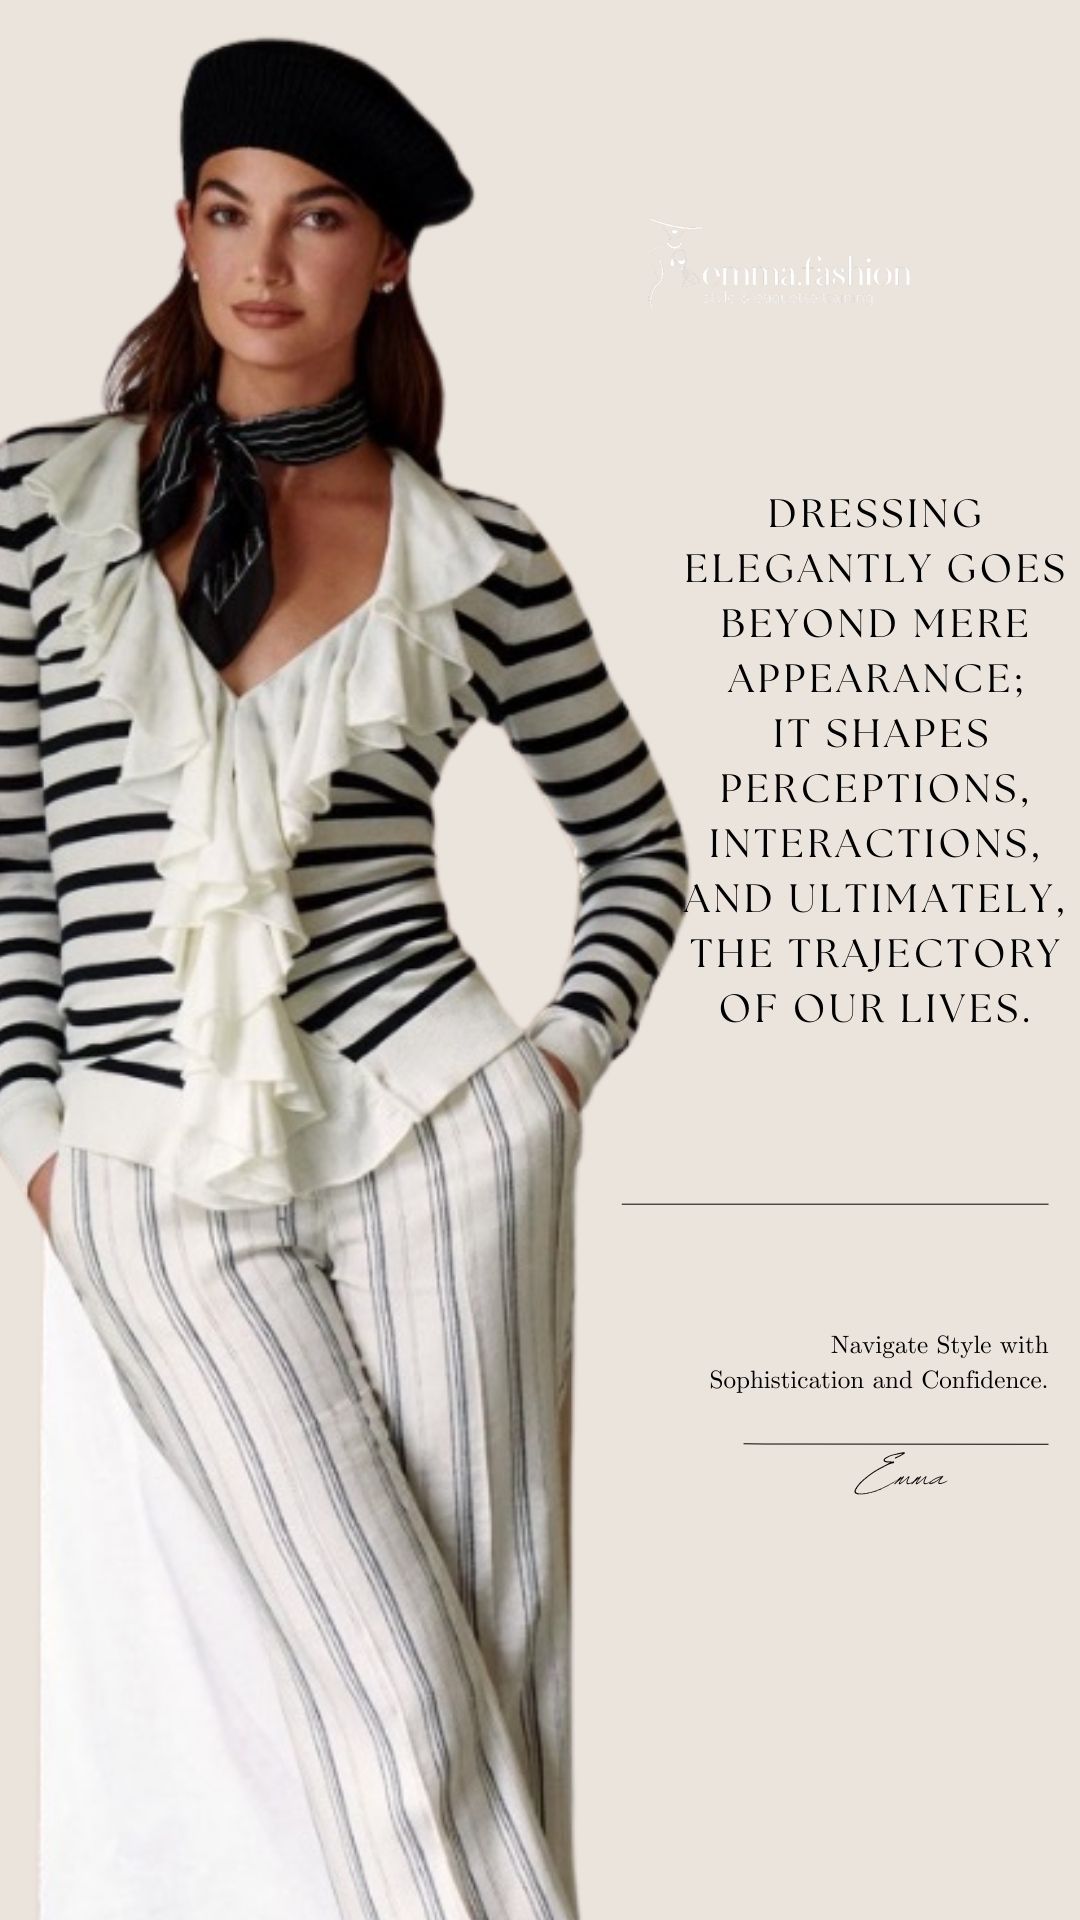 Dressing elegantly is a reflection of excellence and self-expression.